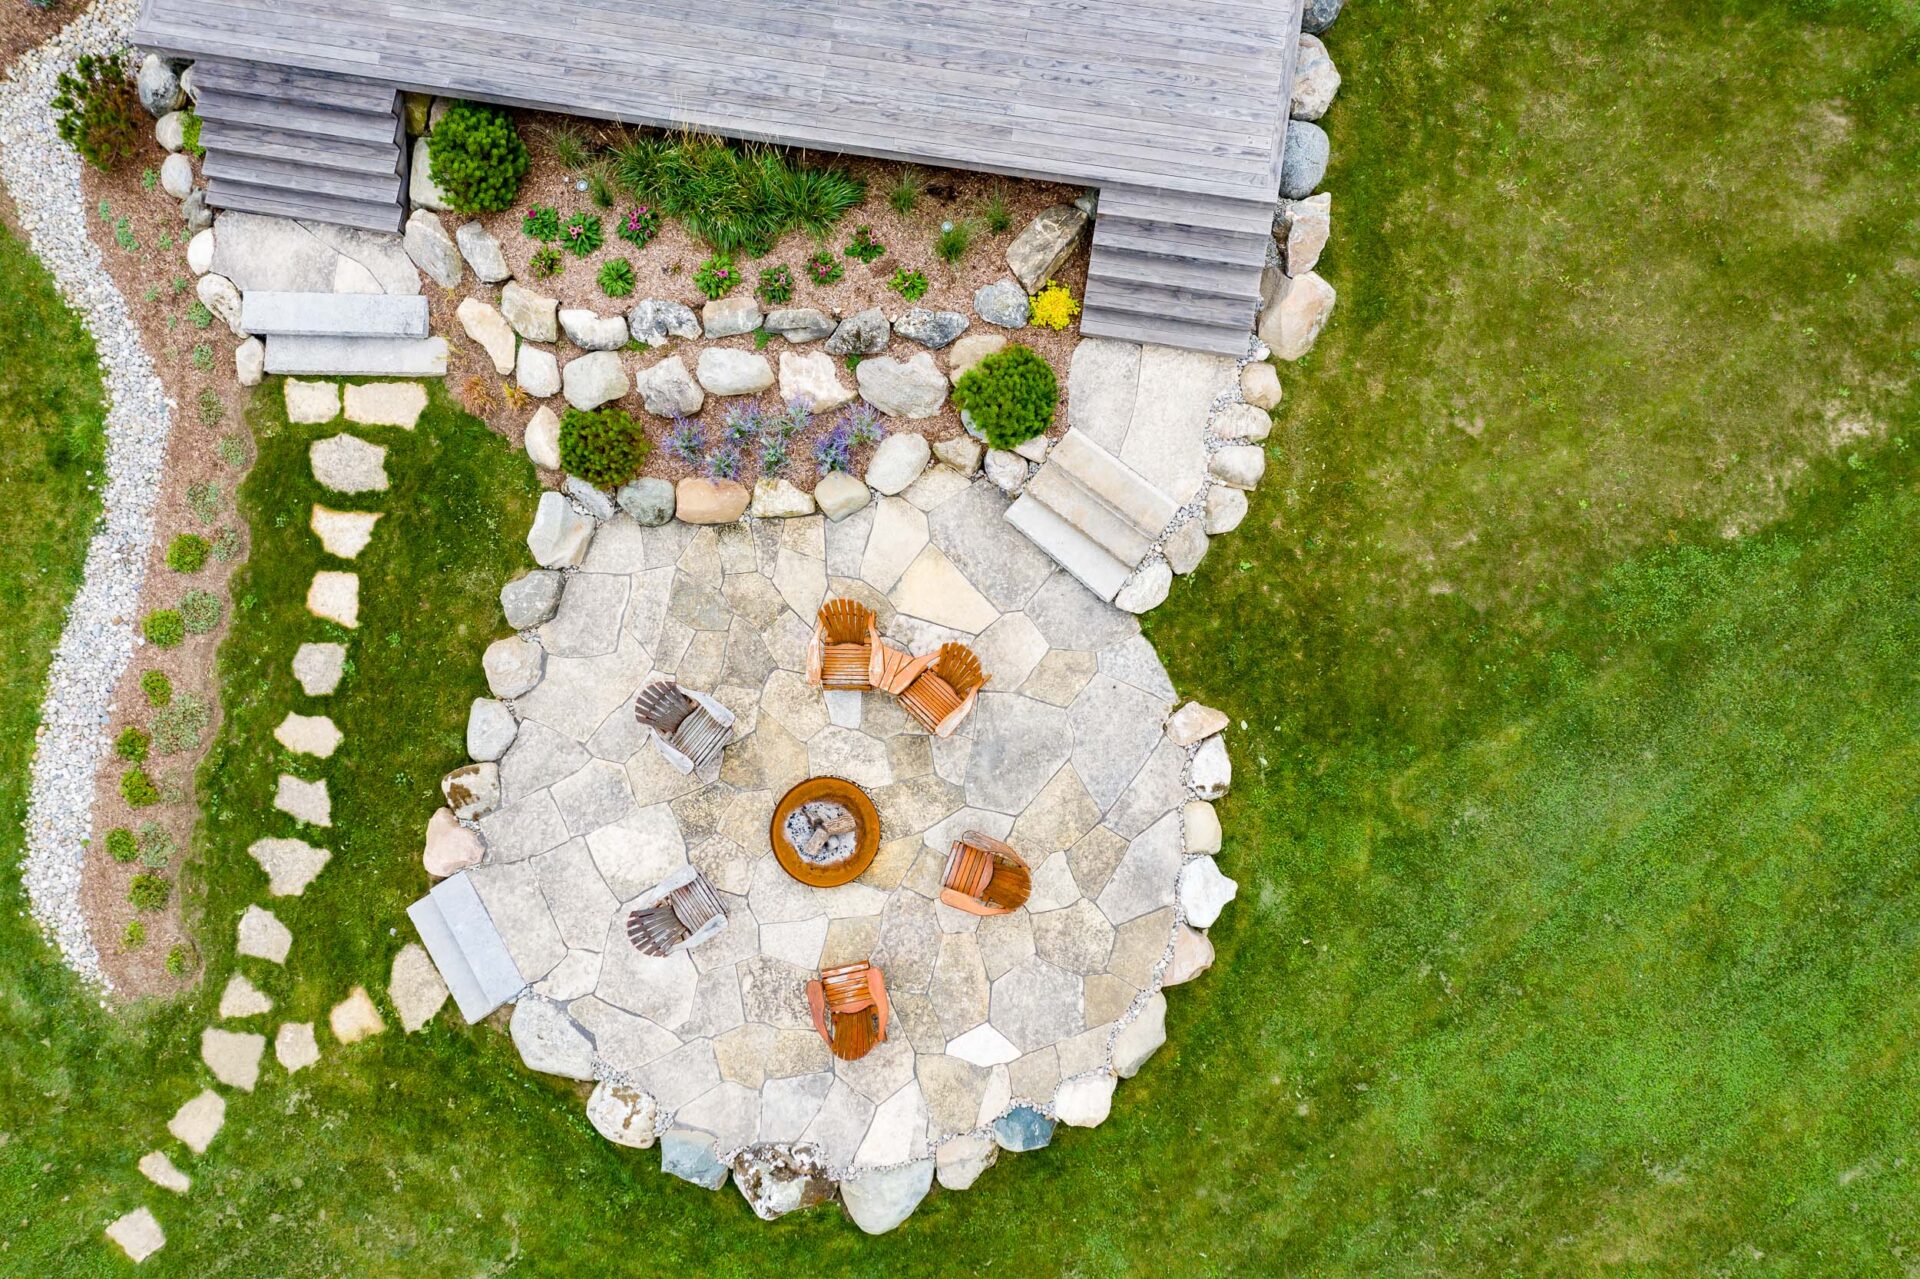 Aerial view of a landscaped outdoor area with a stone patio, fire pit, wooden chairs, surrounded by green grass and a wooden structure.